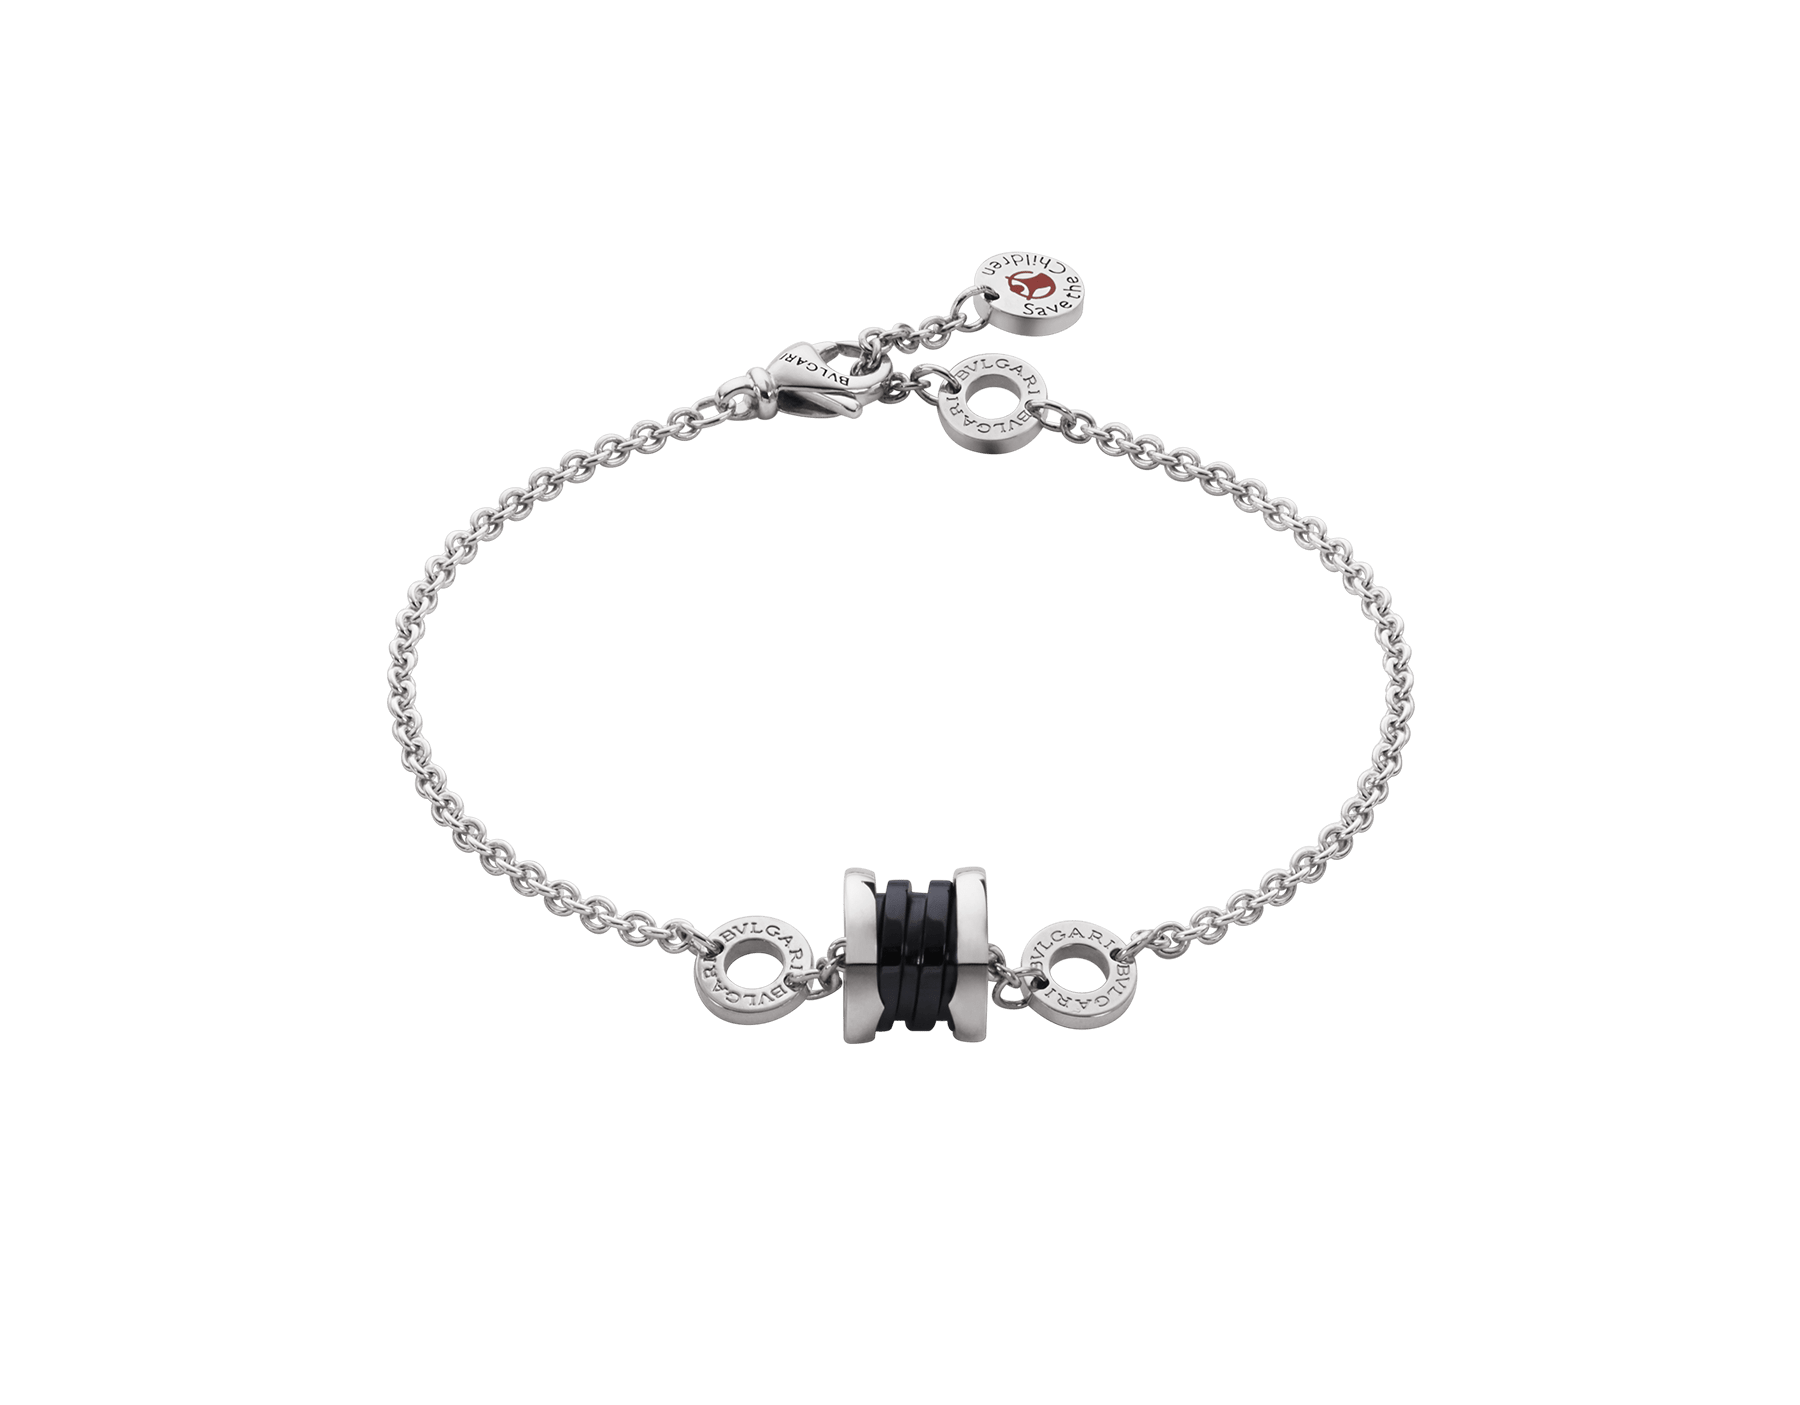 Many dangerous situations Centimeter Industrialize Save the Children Bracciale 352650 | BVLGARI